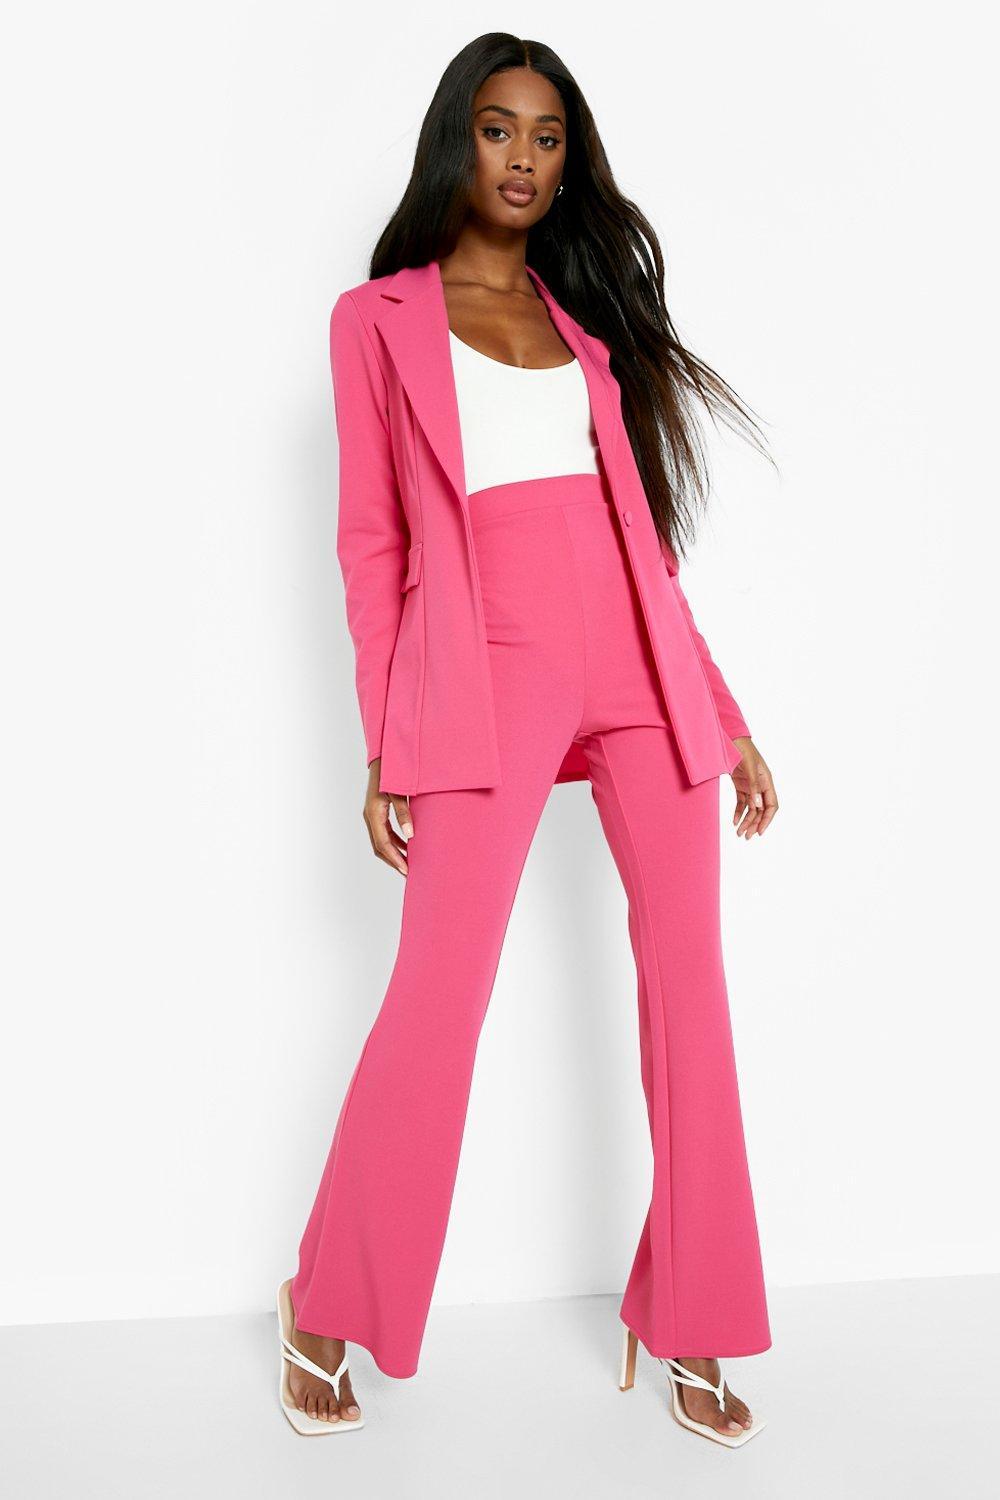 IKI CHIC Pant Set  Buy IKI CHIC Women Fitted Blue Blazer And Pants Set Set  of 2 Online  Nykaa Fashion